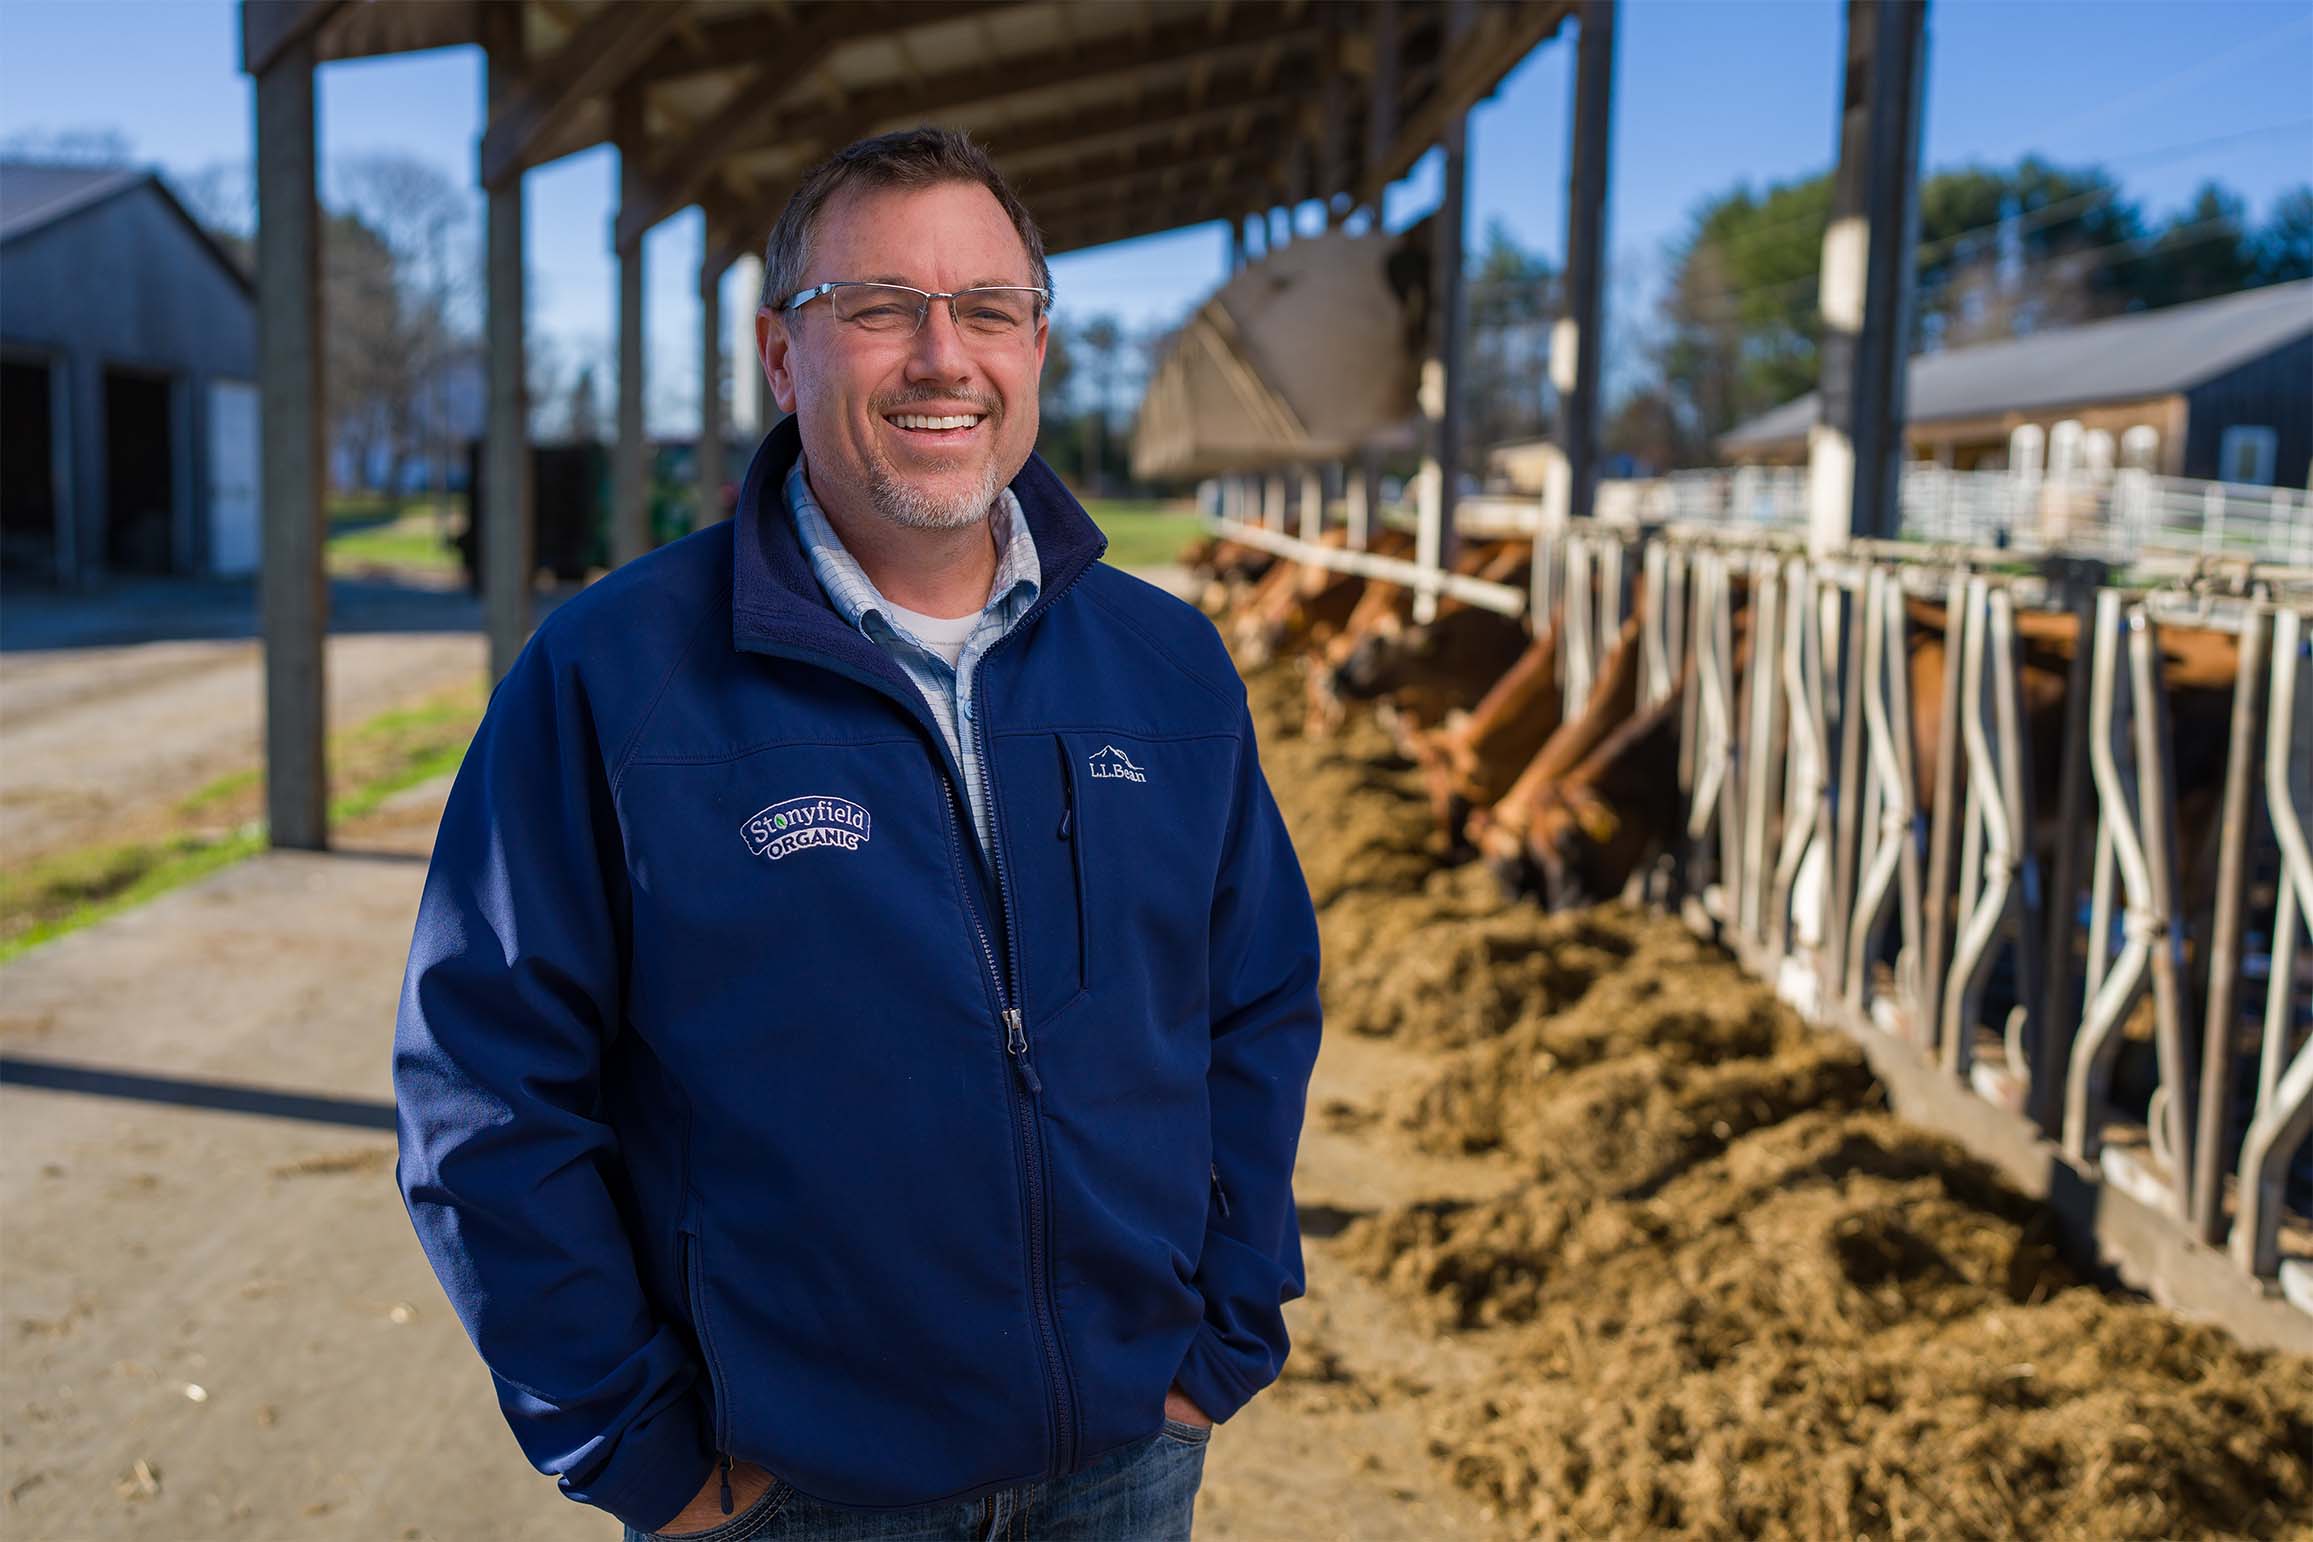 COLSA alum Jason Johnson '96 smiles at the camera while standing in front of the feed stalls at the UNH Organic Dairy Research Farm in Lee, N.H.